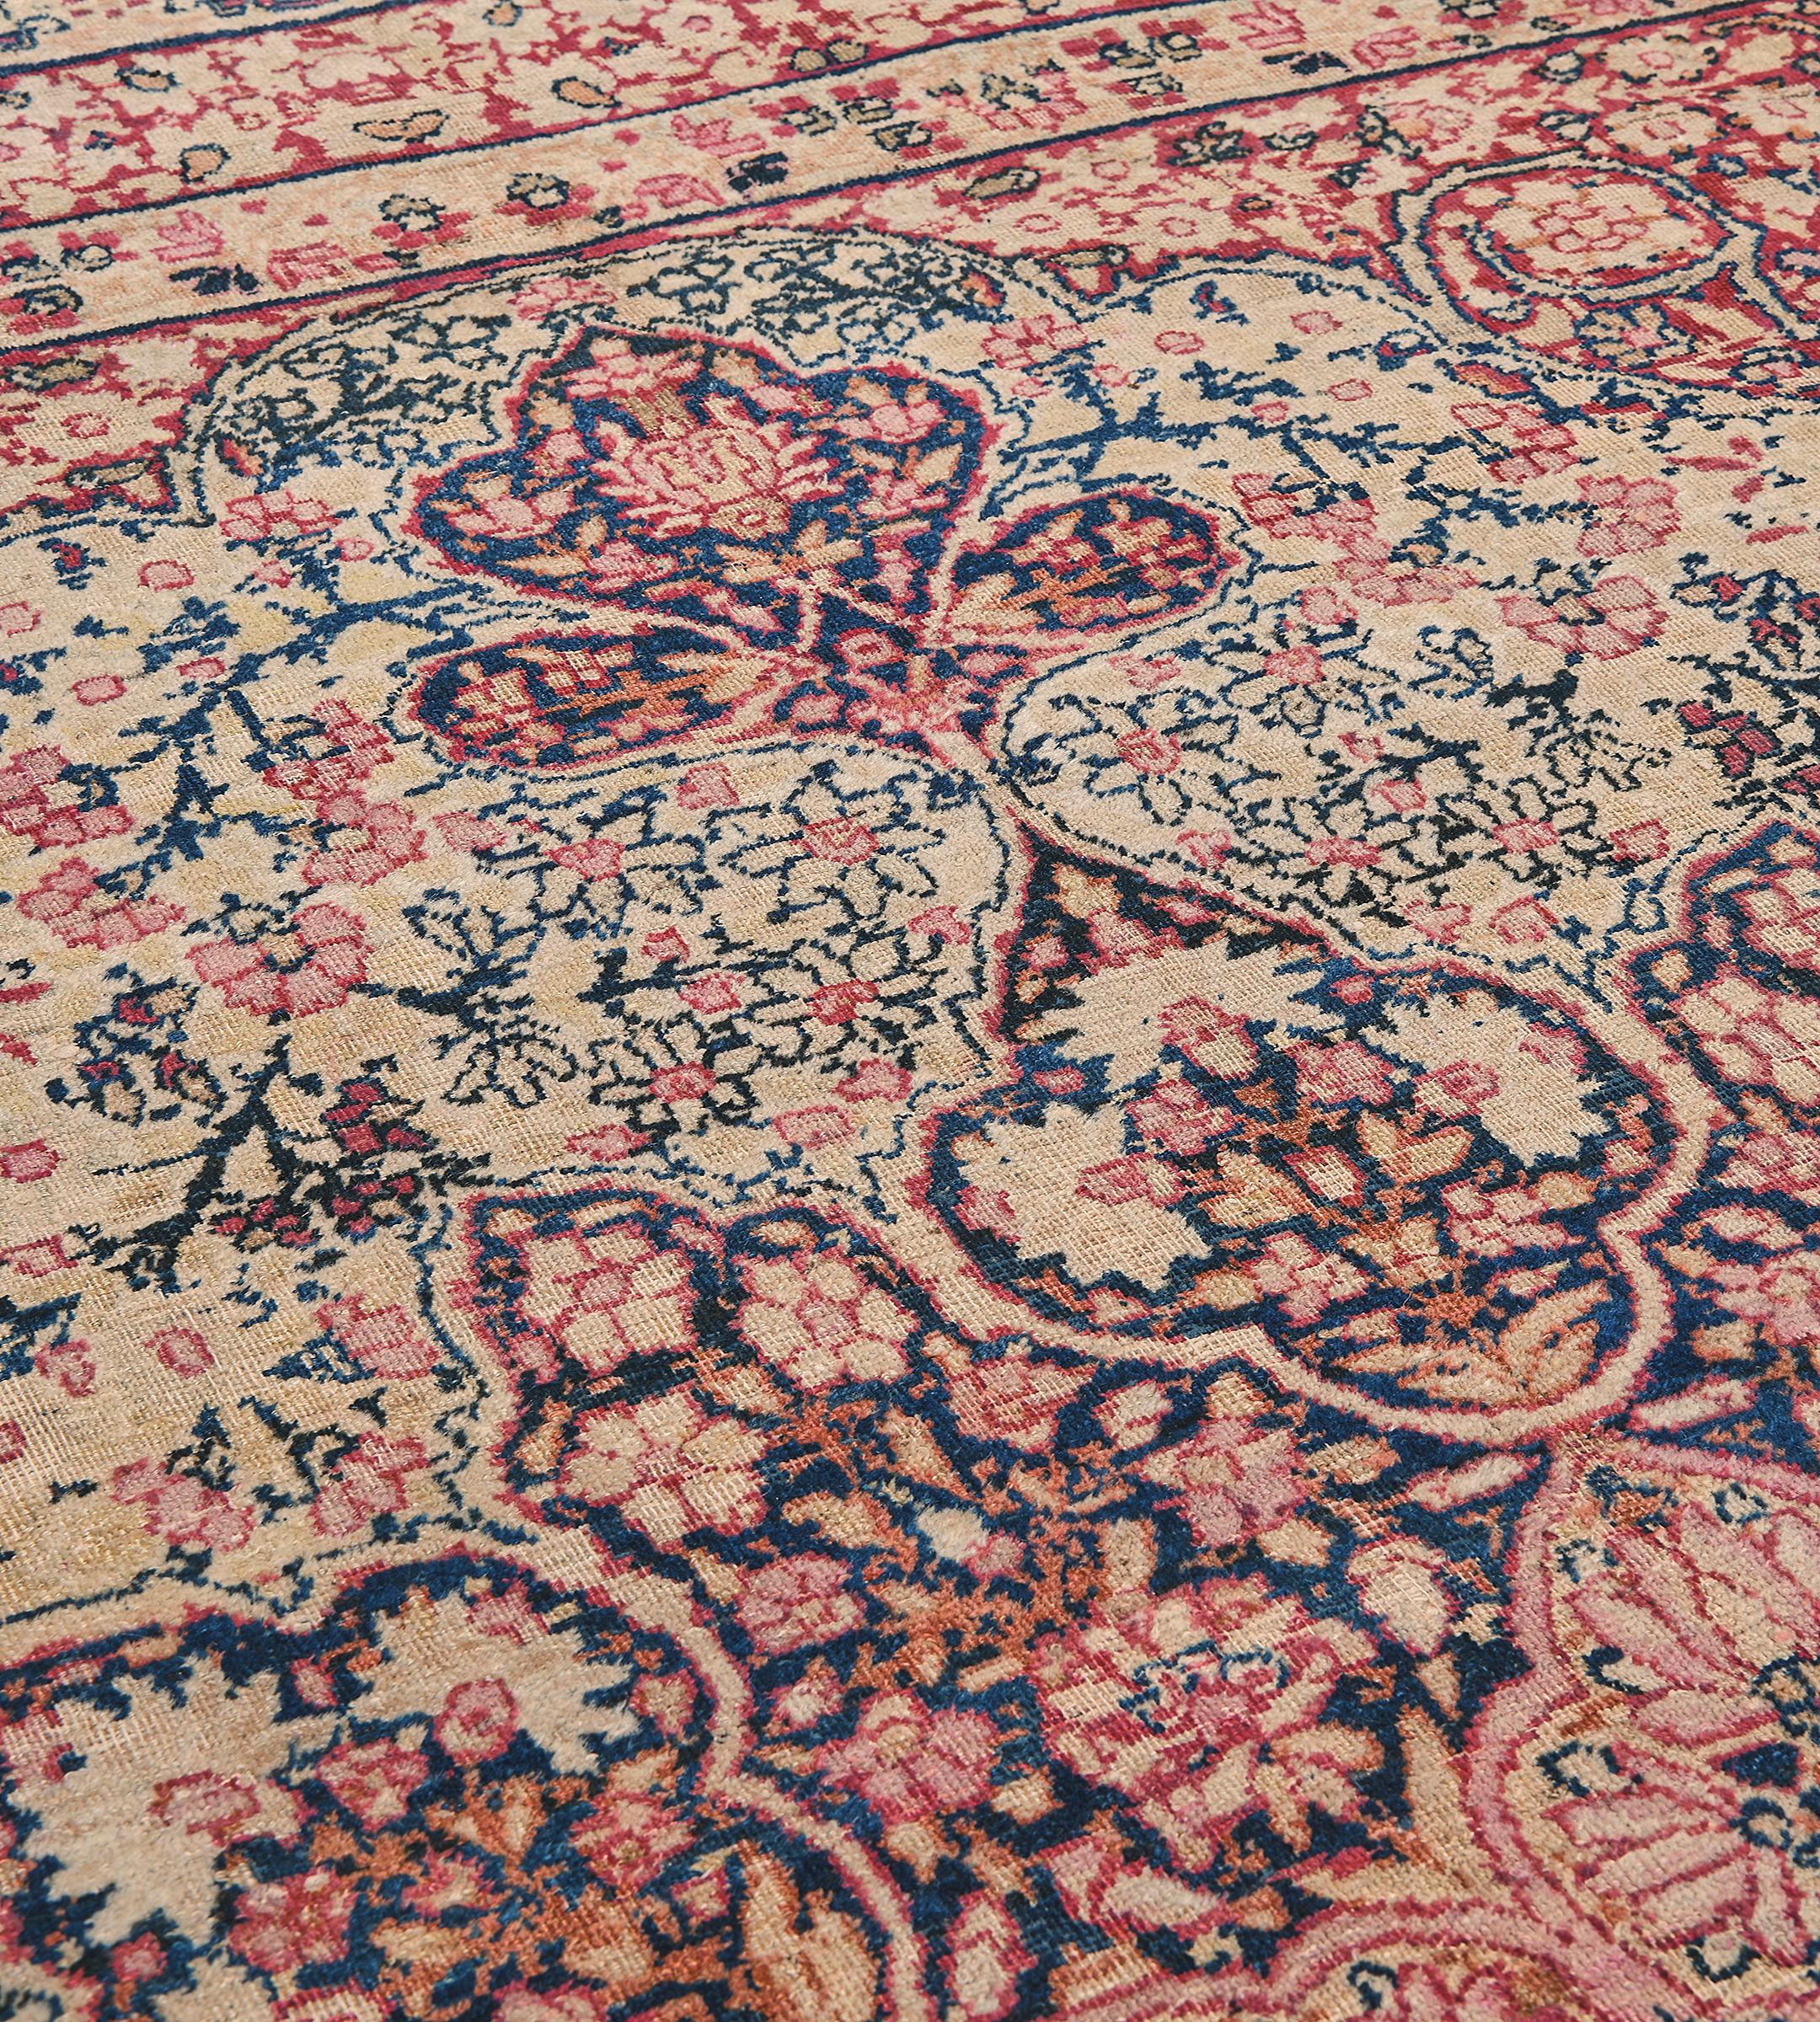 19th Century Antique Hand-Woven Traditional Floral Persian Kerman Rug  For Sale